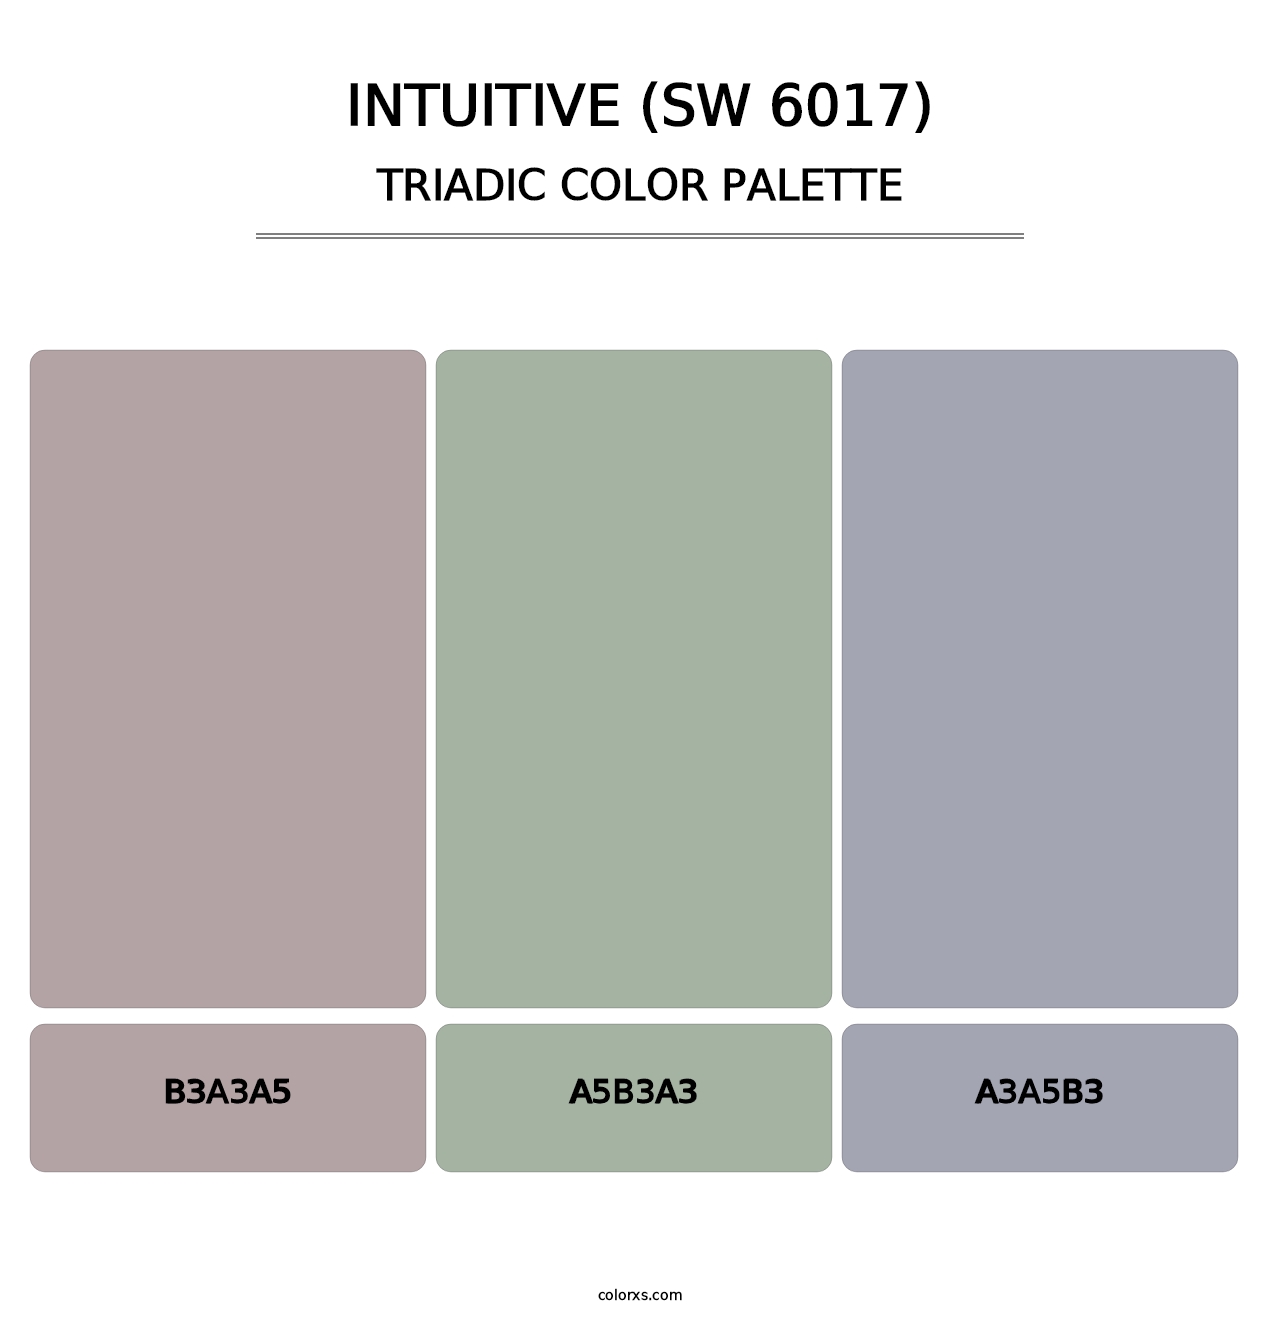 Intuitive (SW 6017) - Triadic Color Palette